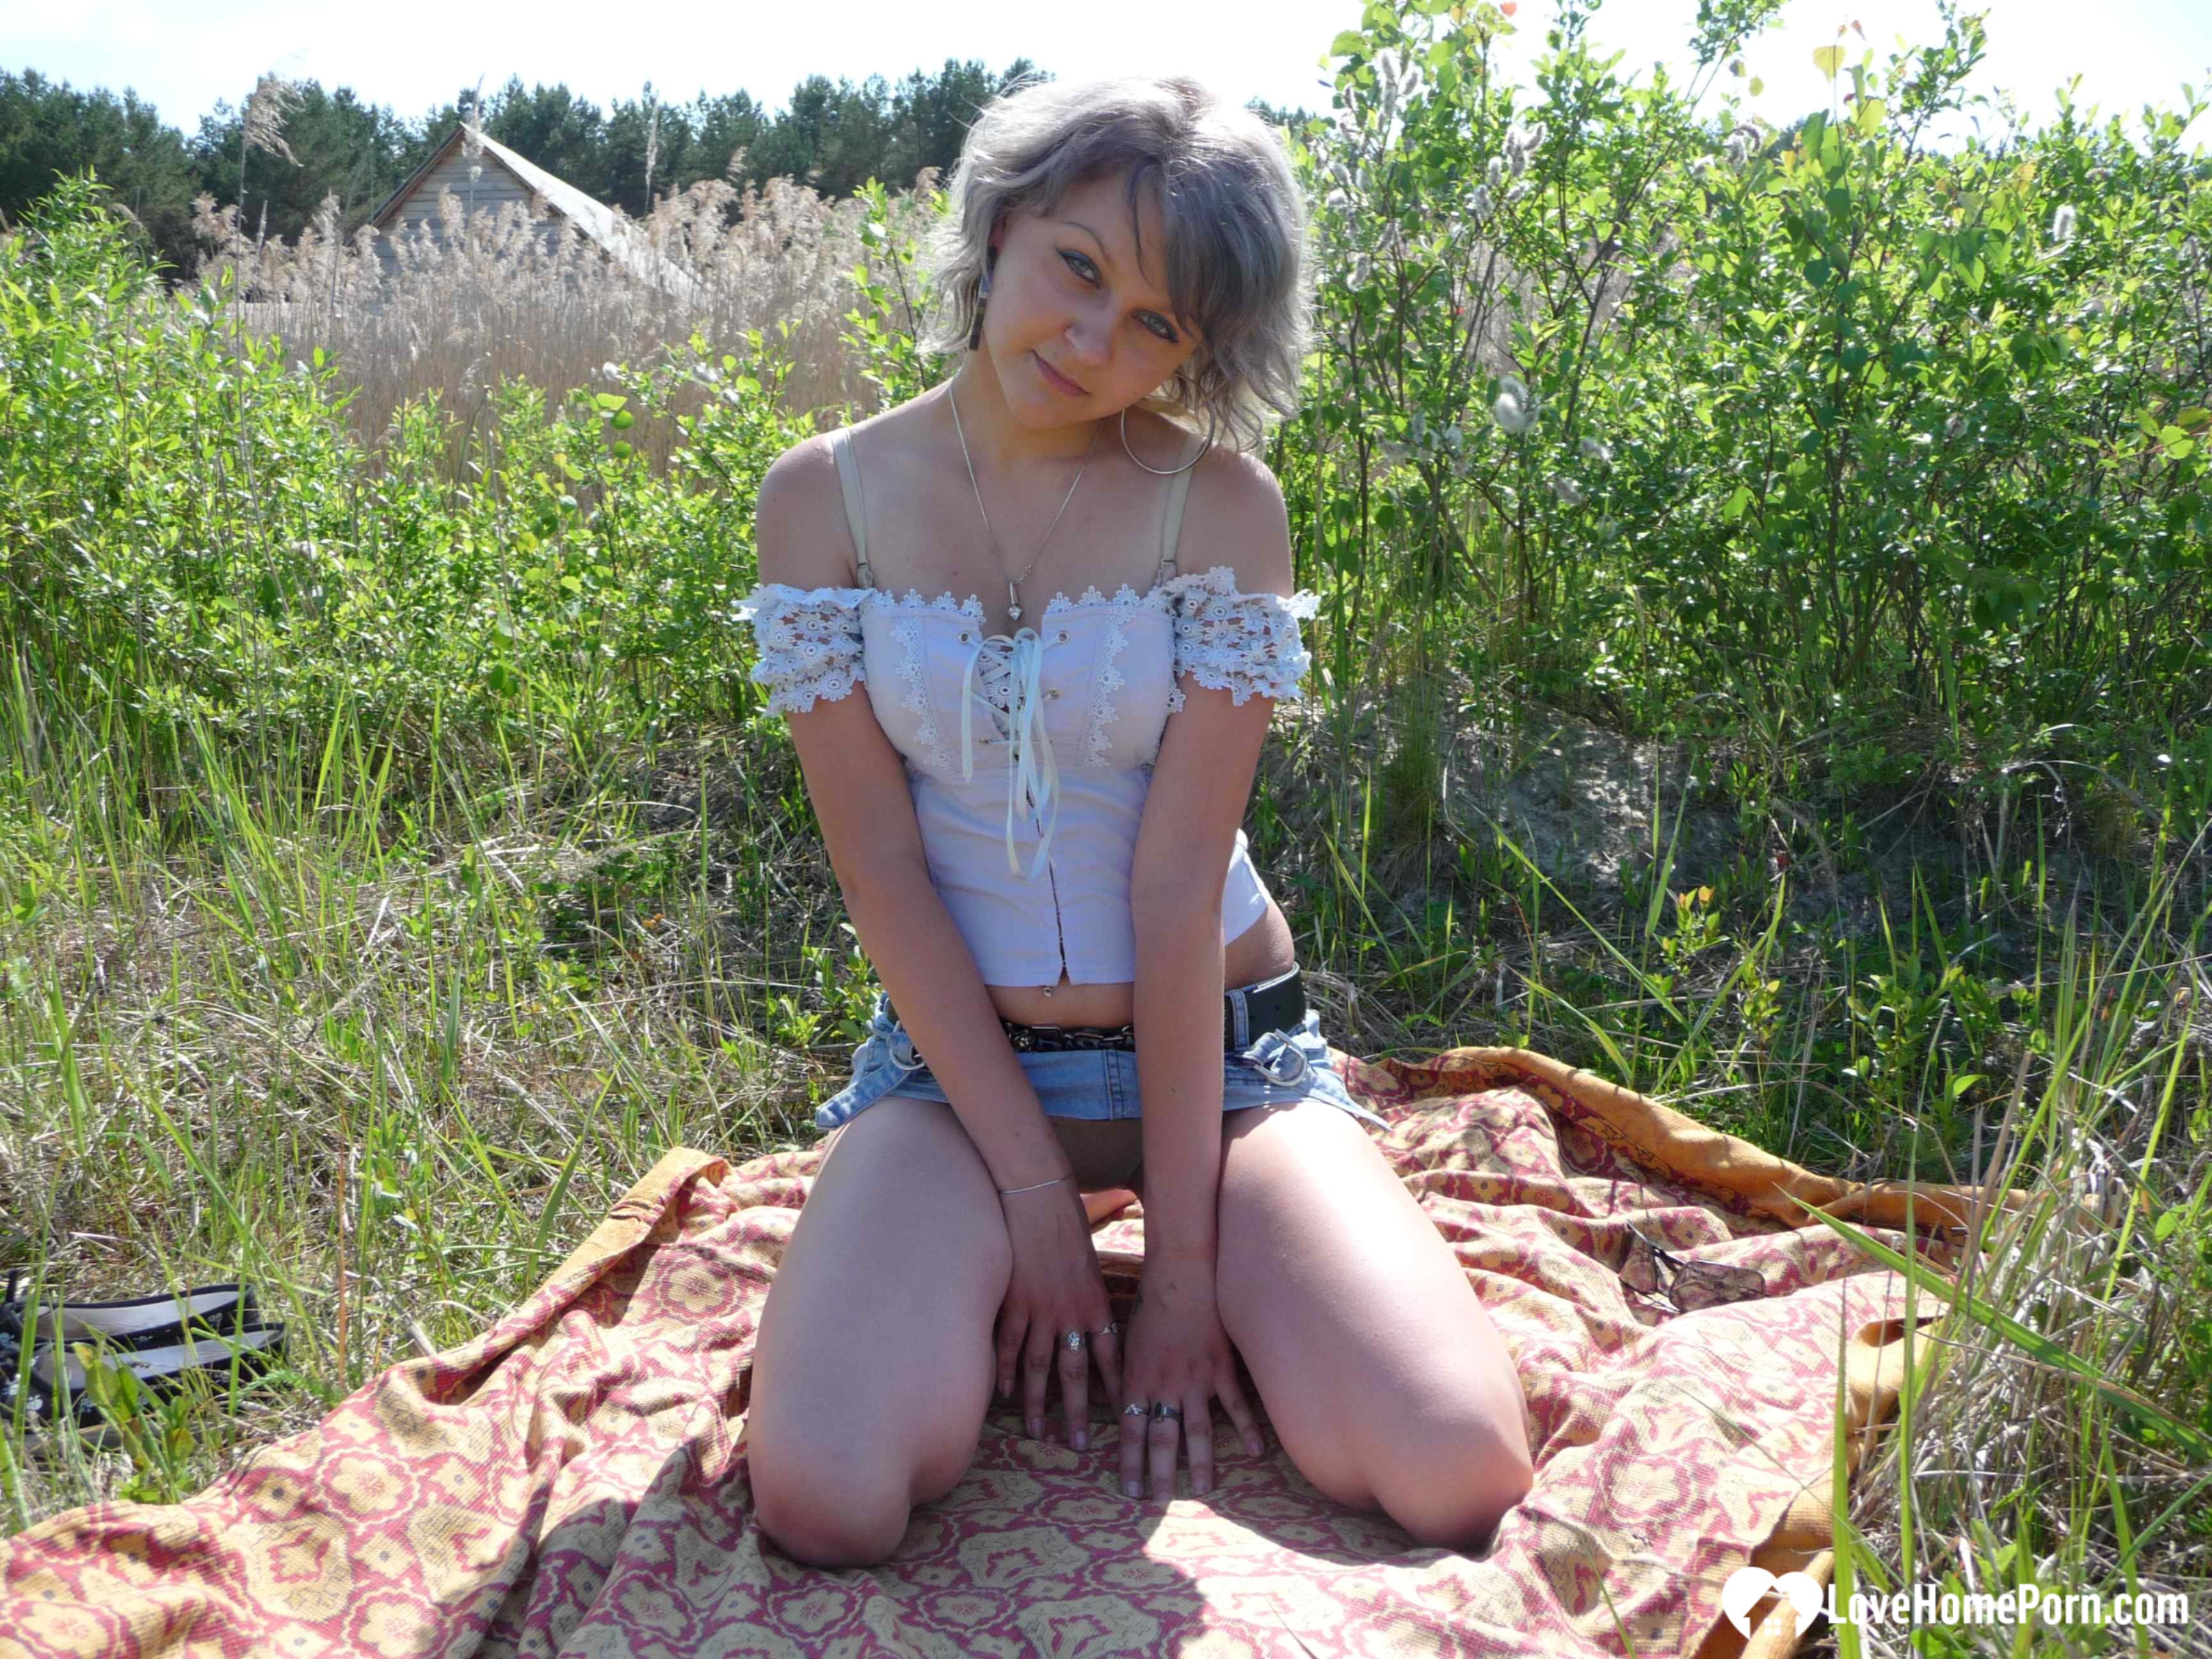 Gray-haired beauty posing naked outdoors on a blanket